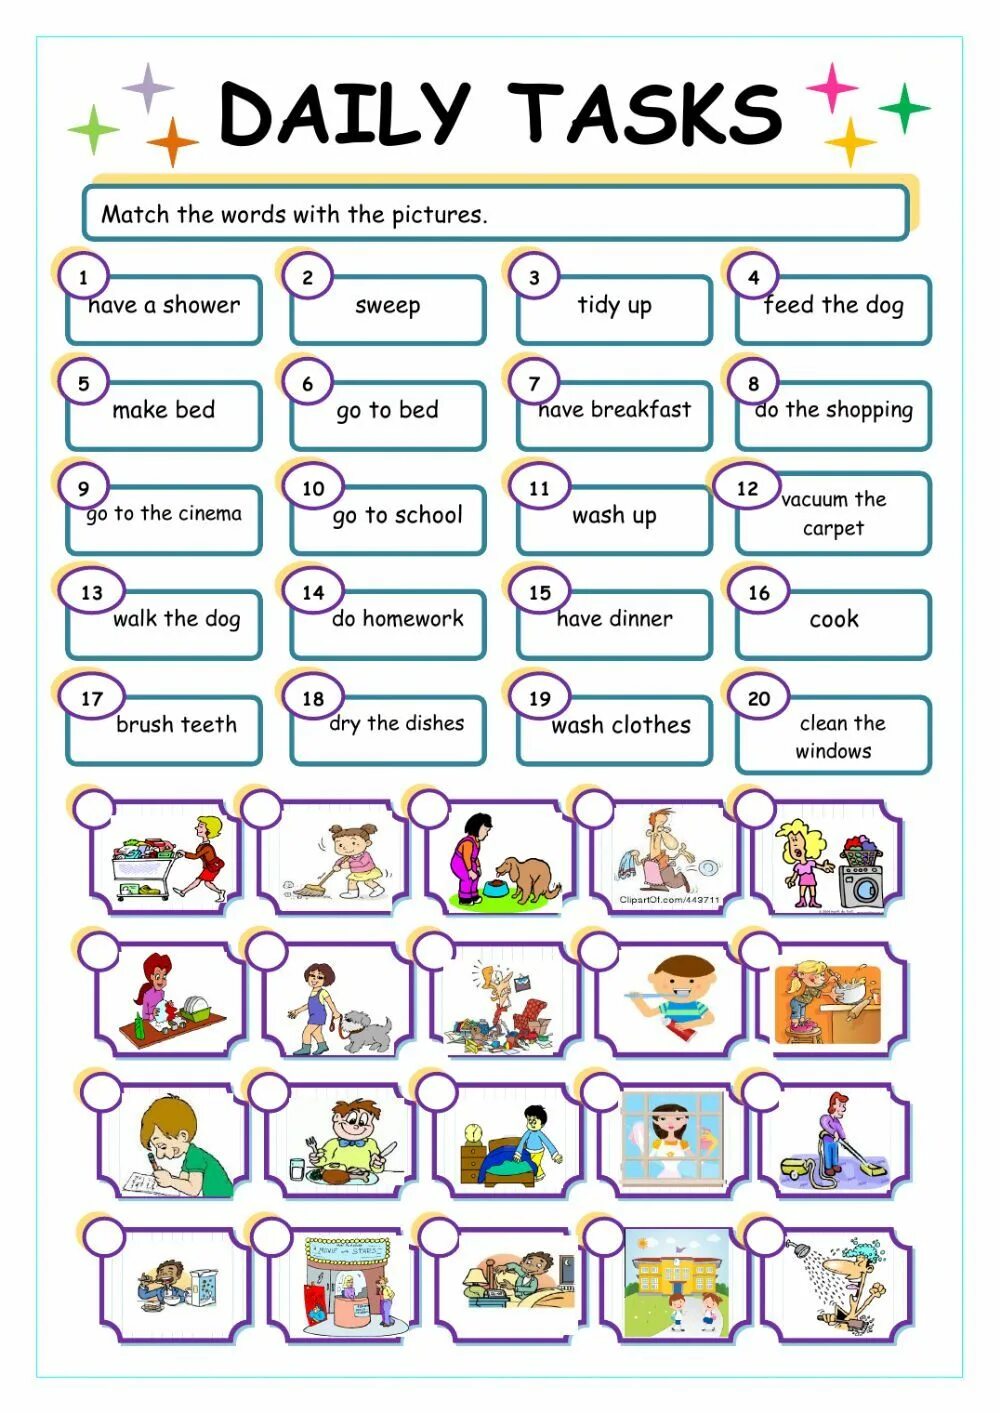 Matching the task to the text. Задания Daily Routine for Kids. Daily activities задания. Daily Routine задания. Daily Routine задания для детей.